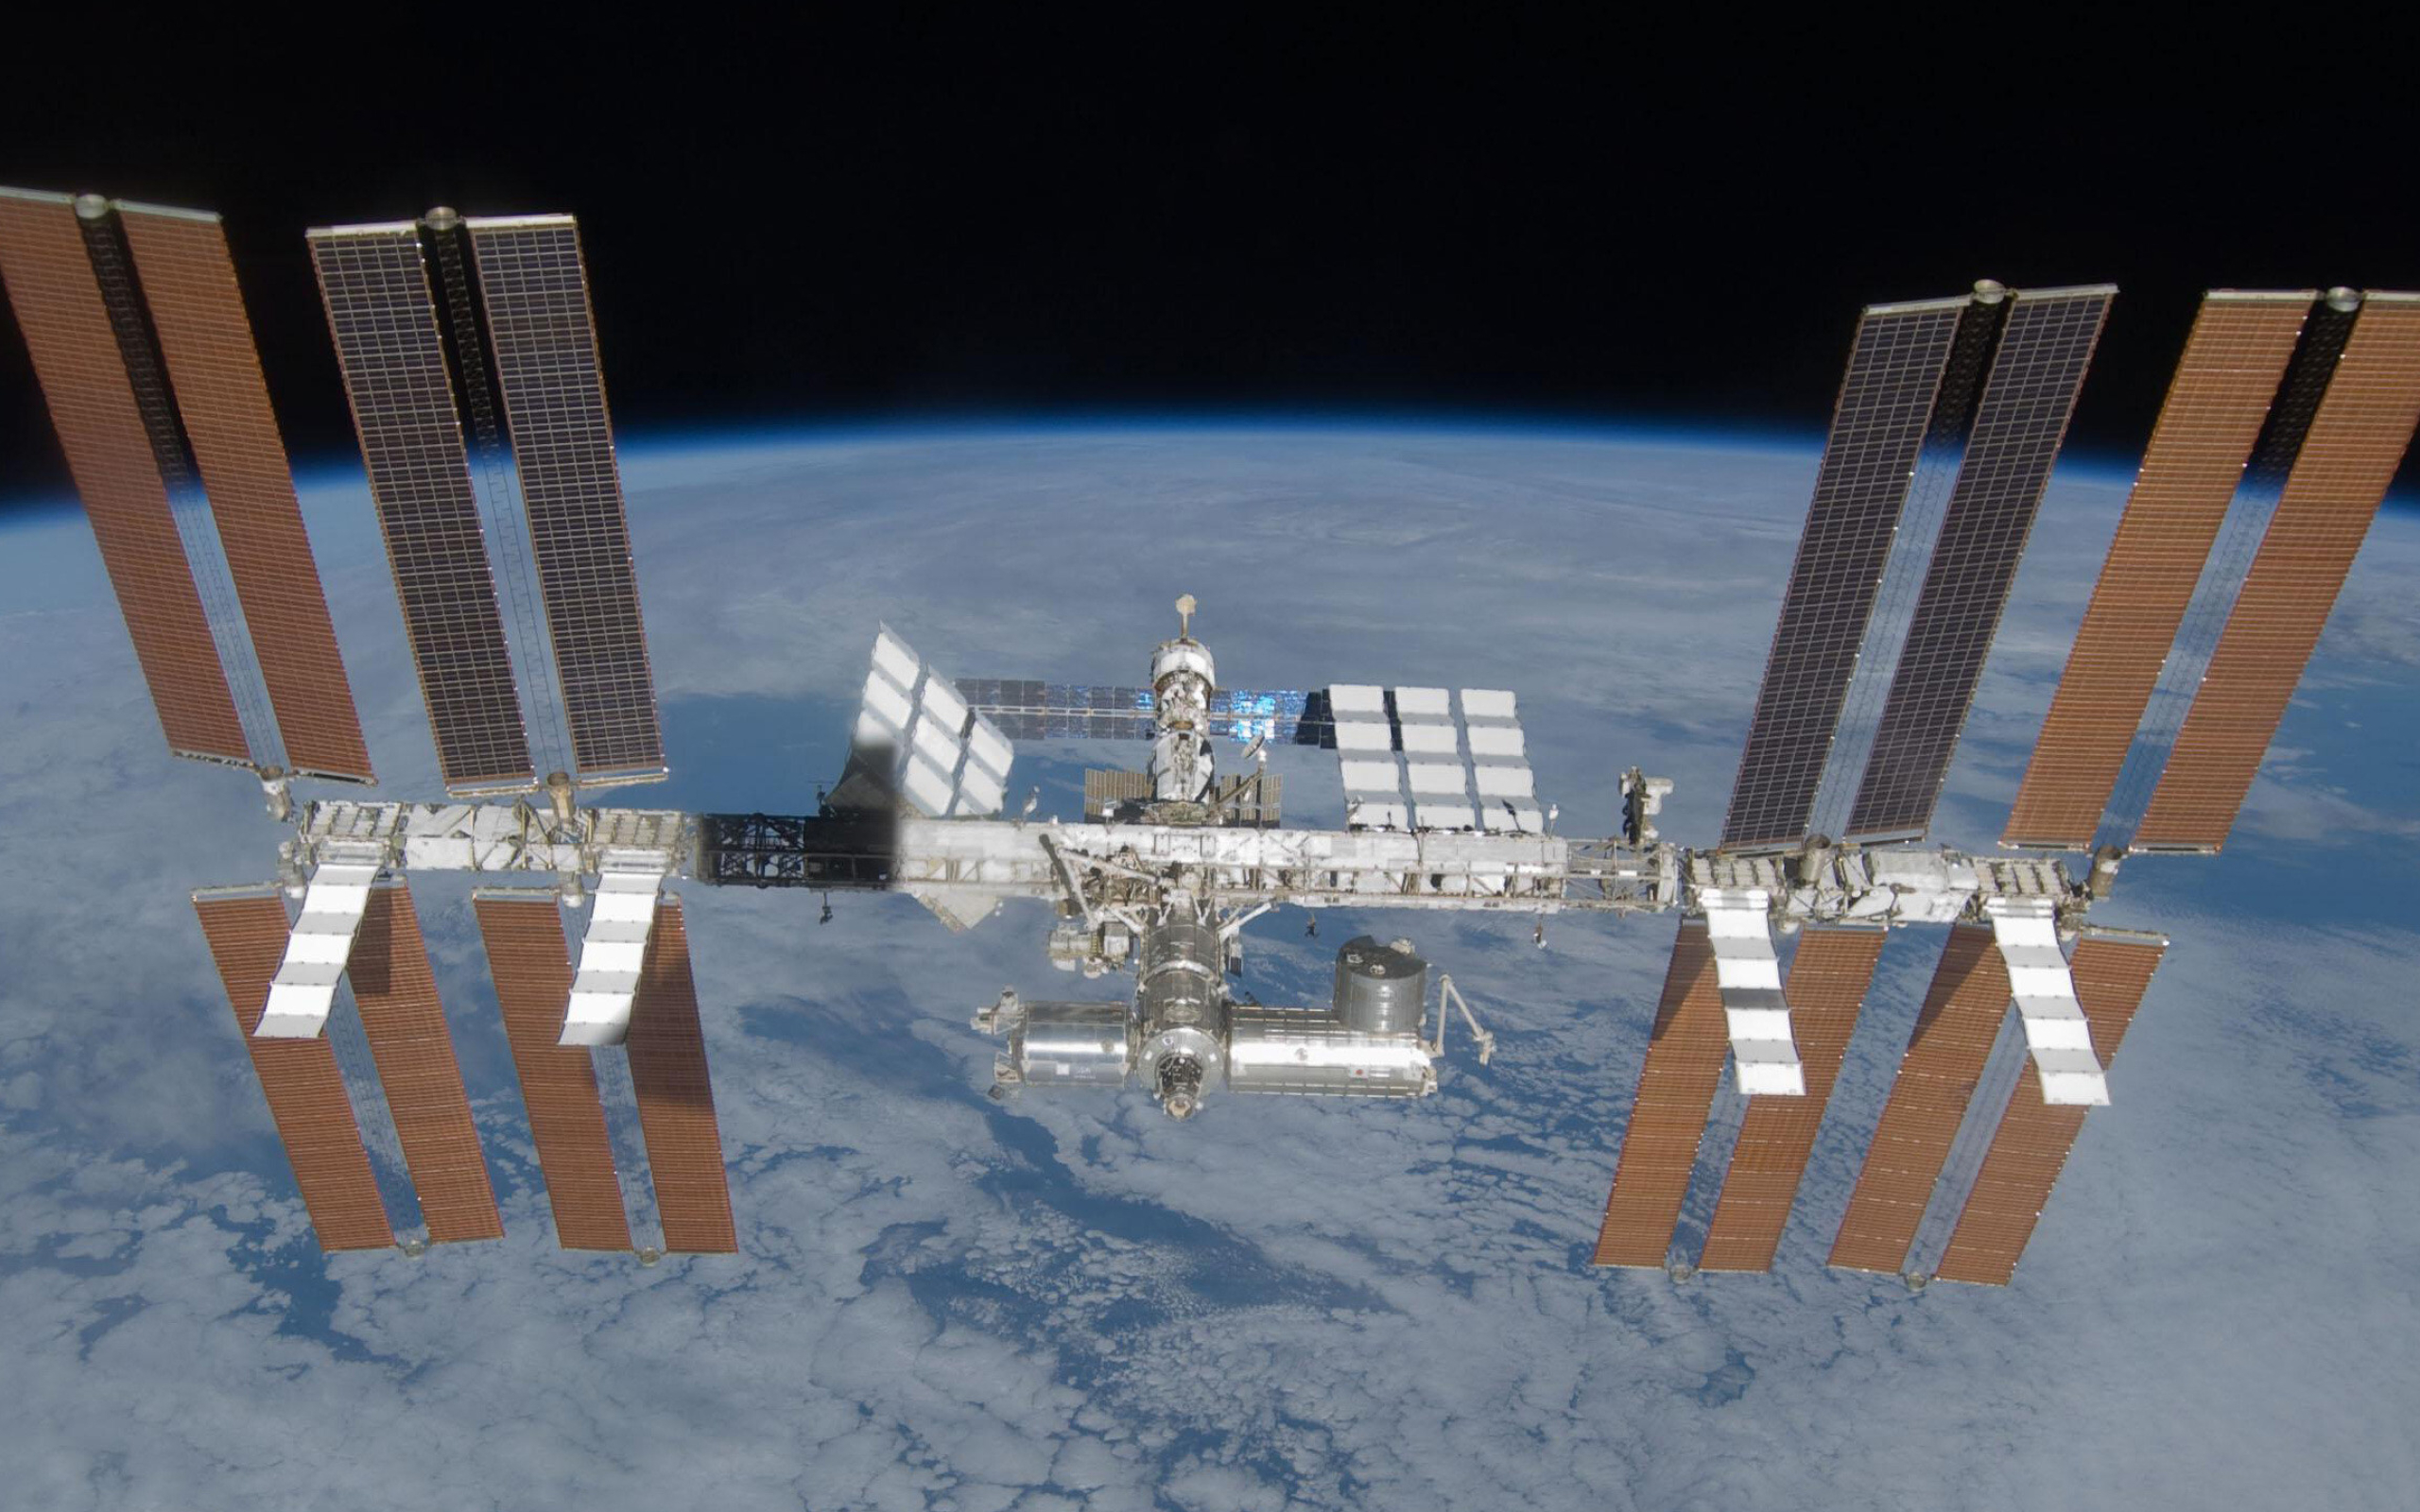 International Space Station: The ISS, suited for testing the spacecraft systems and equipment. 2560x1600 HD Wallpaper.